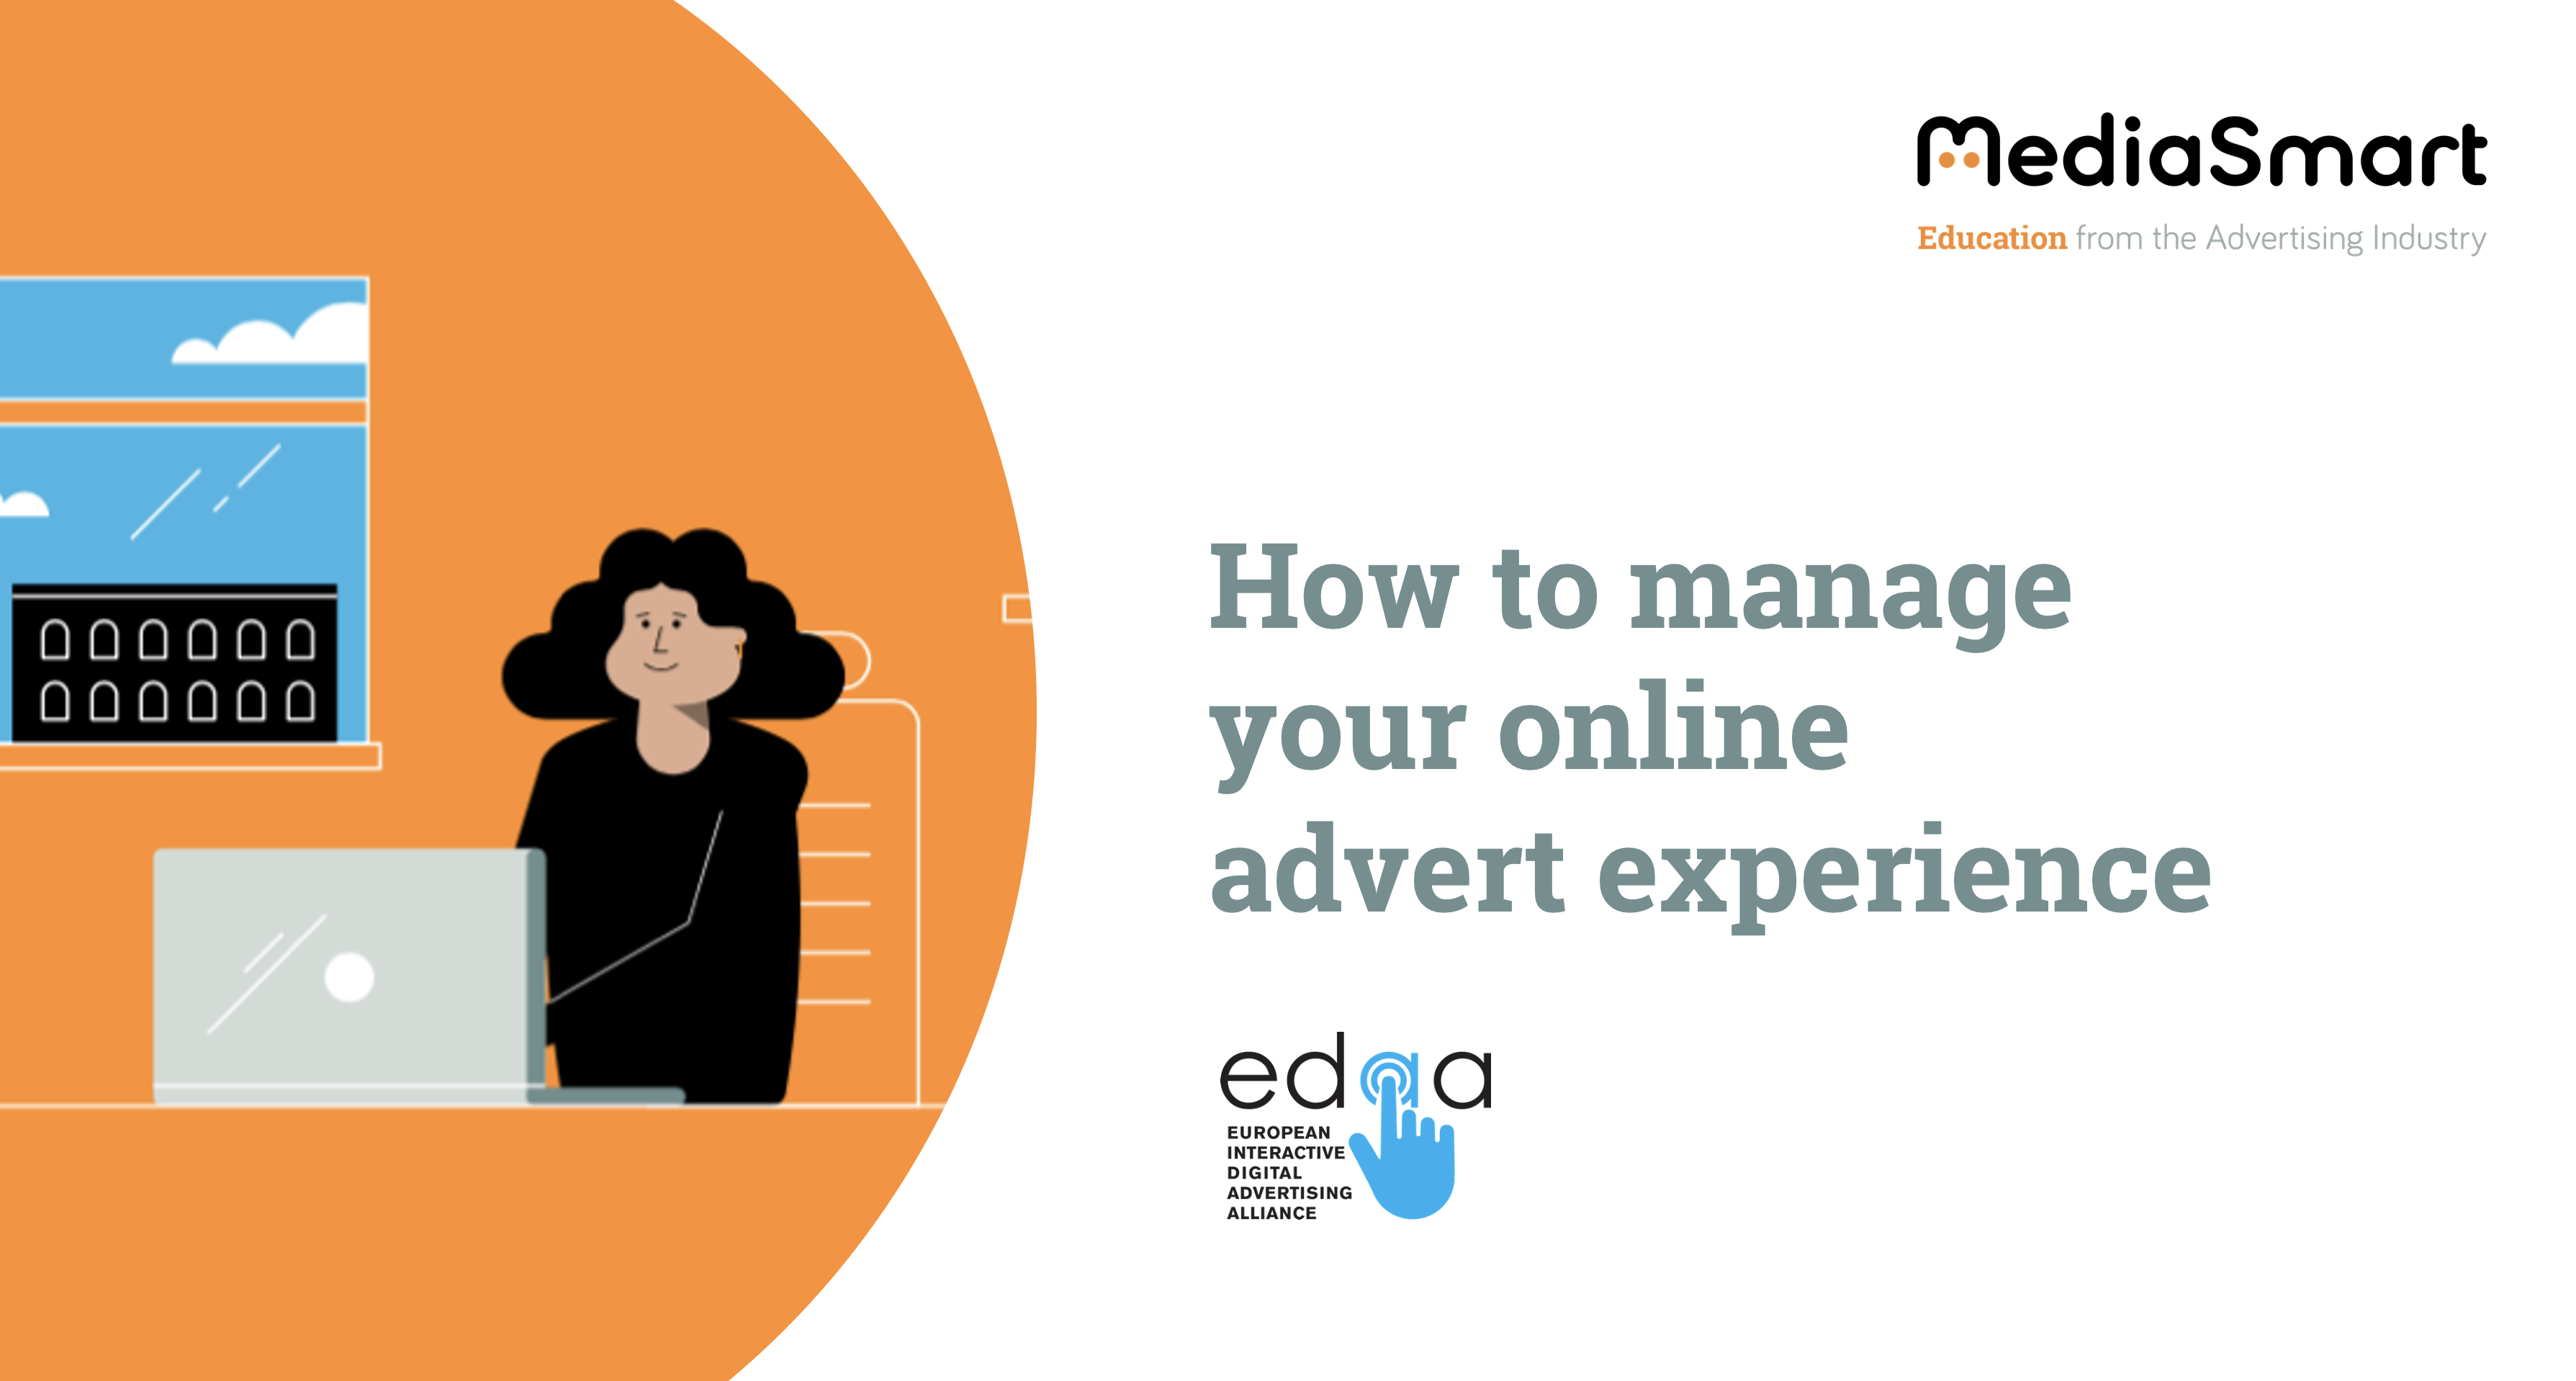 hOW TO MANAGE YOUR ONLINE AD EXPERIENCE